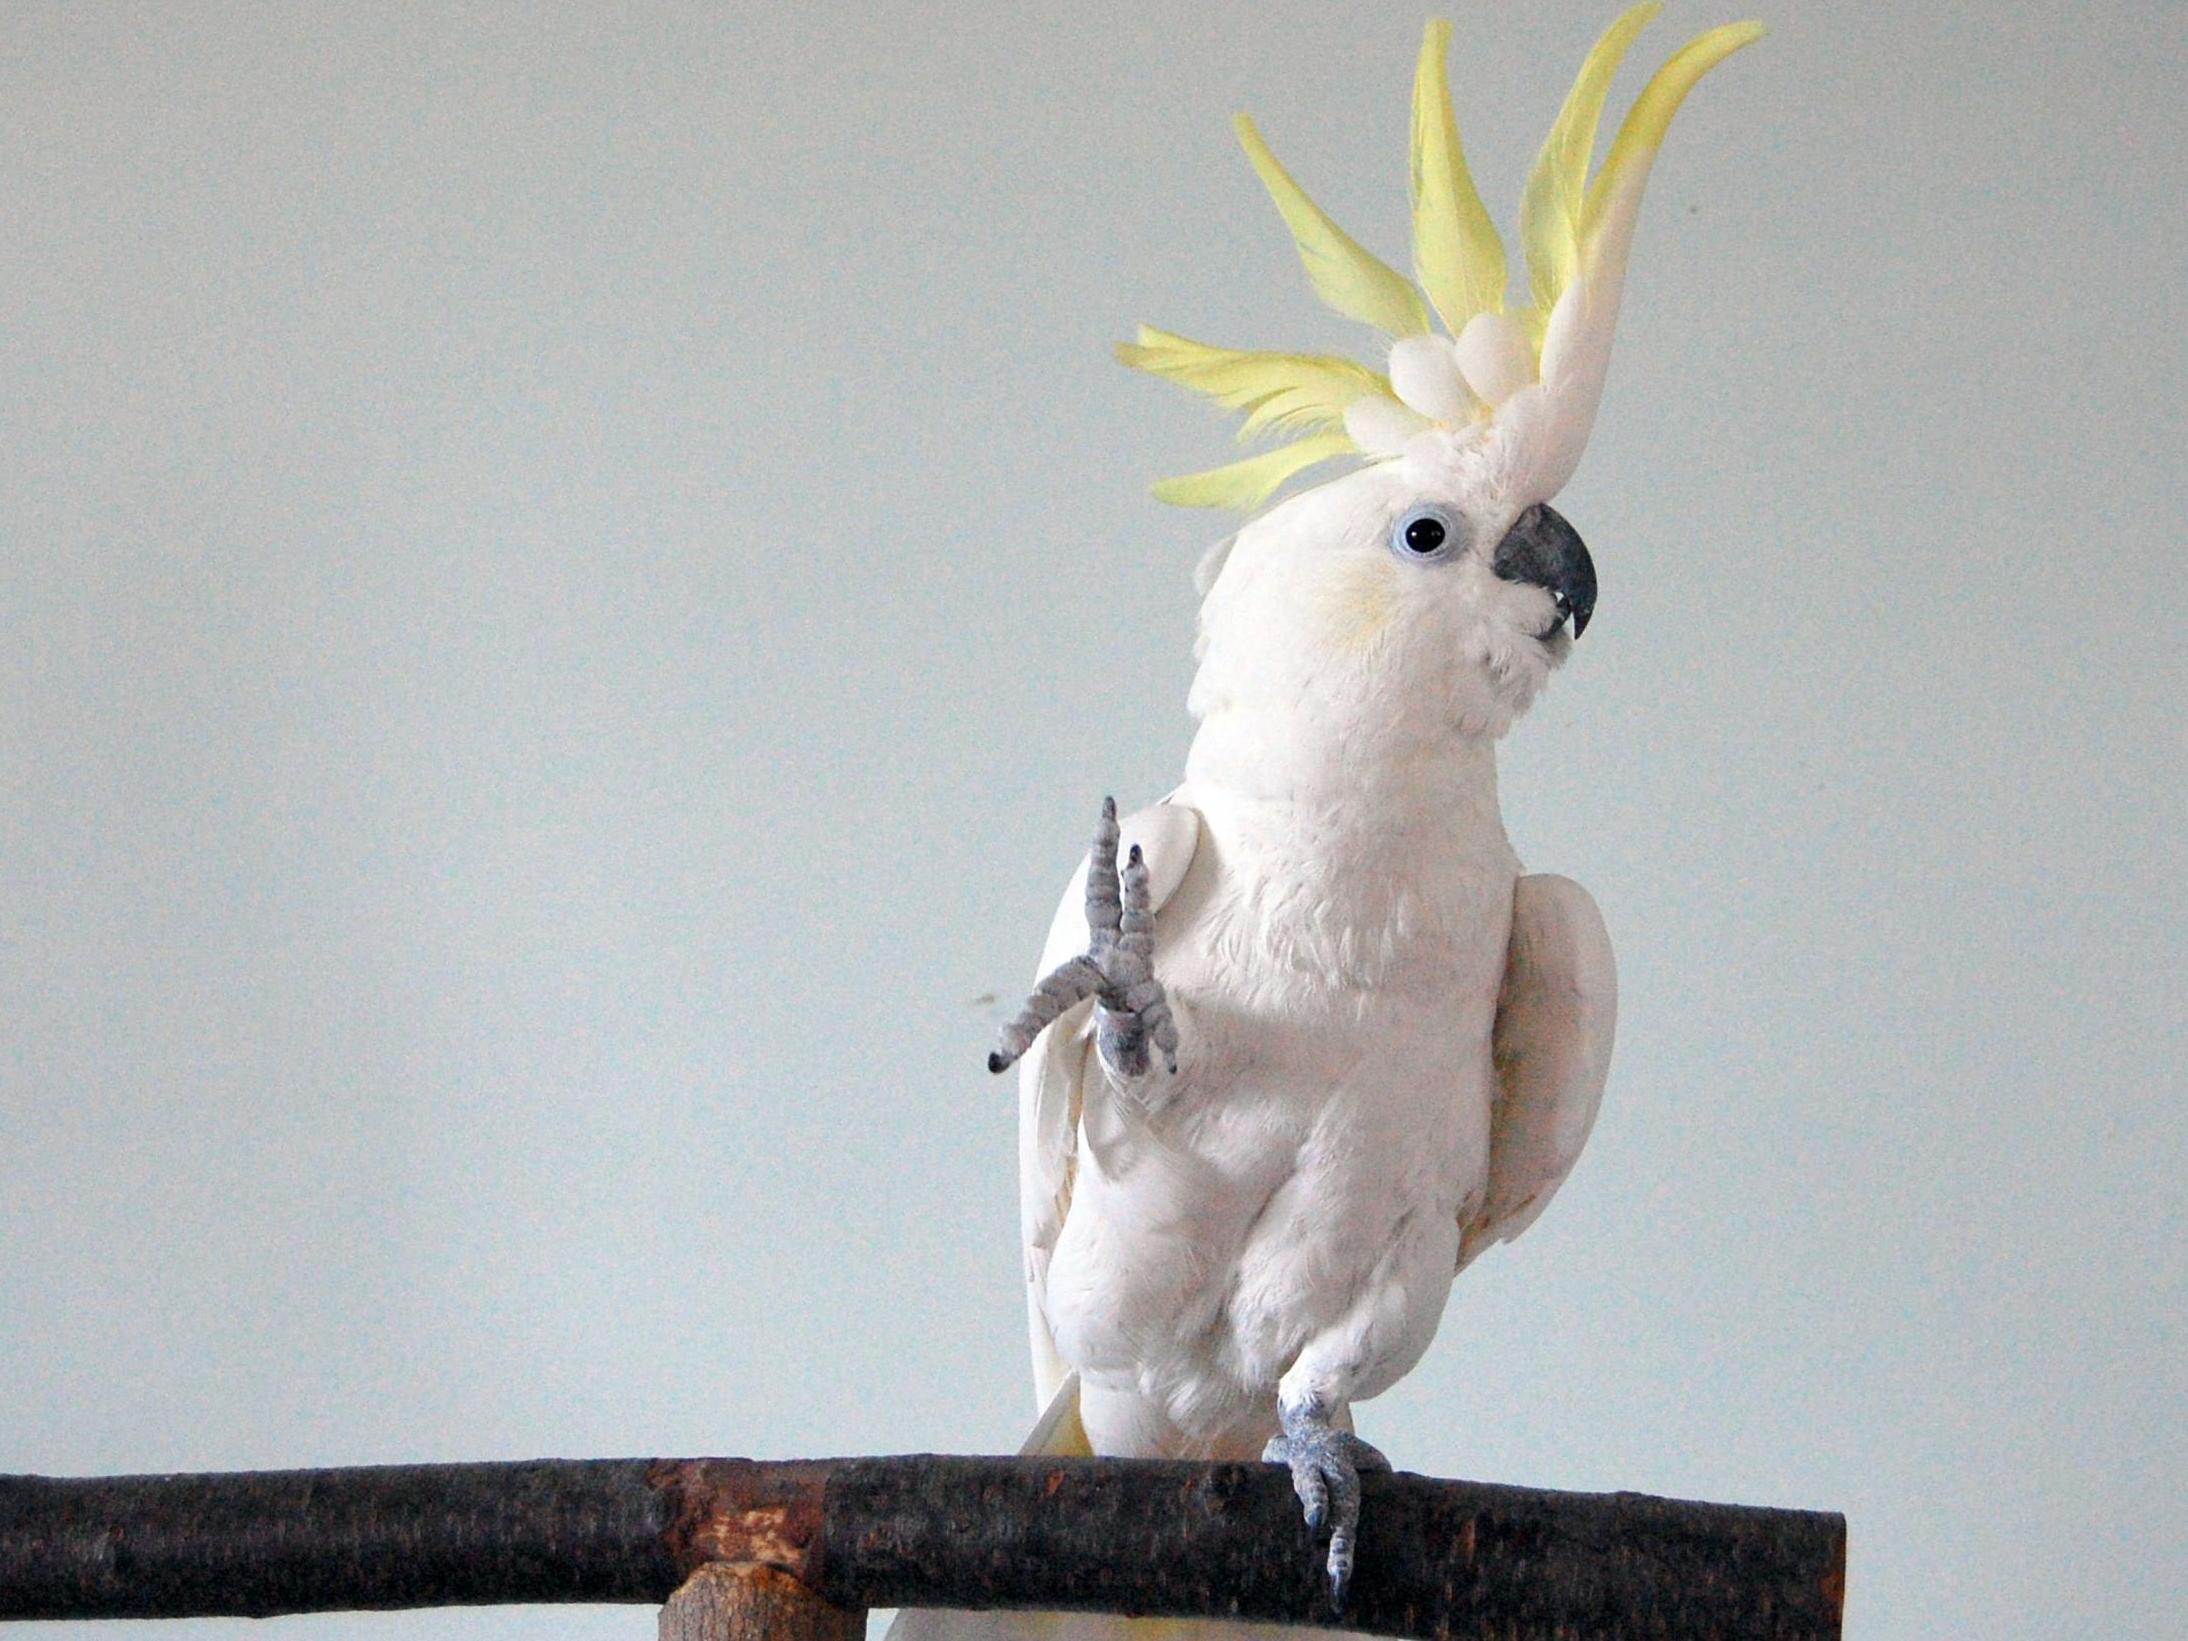 Scientists discover cockatoo has 14 distinct dance moves (with video)